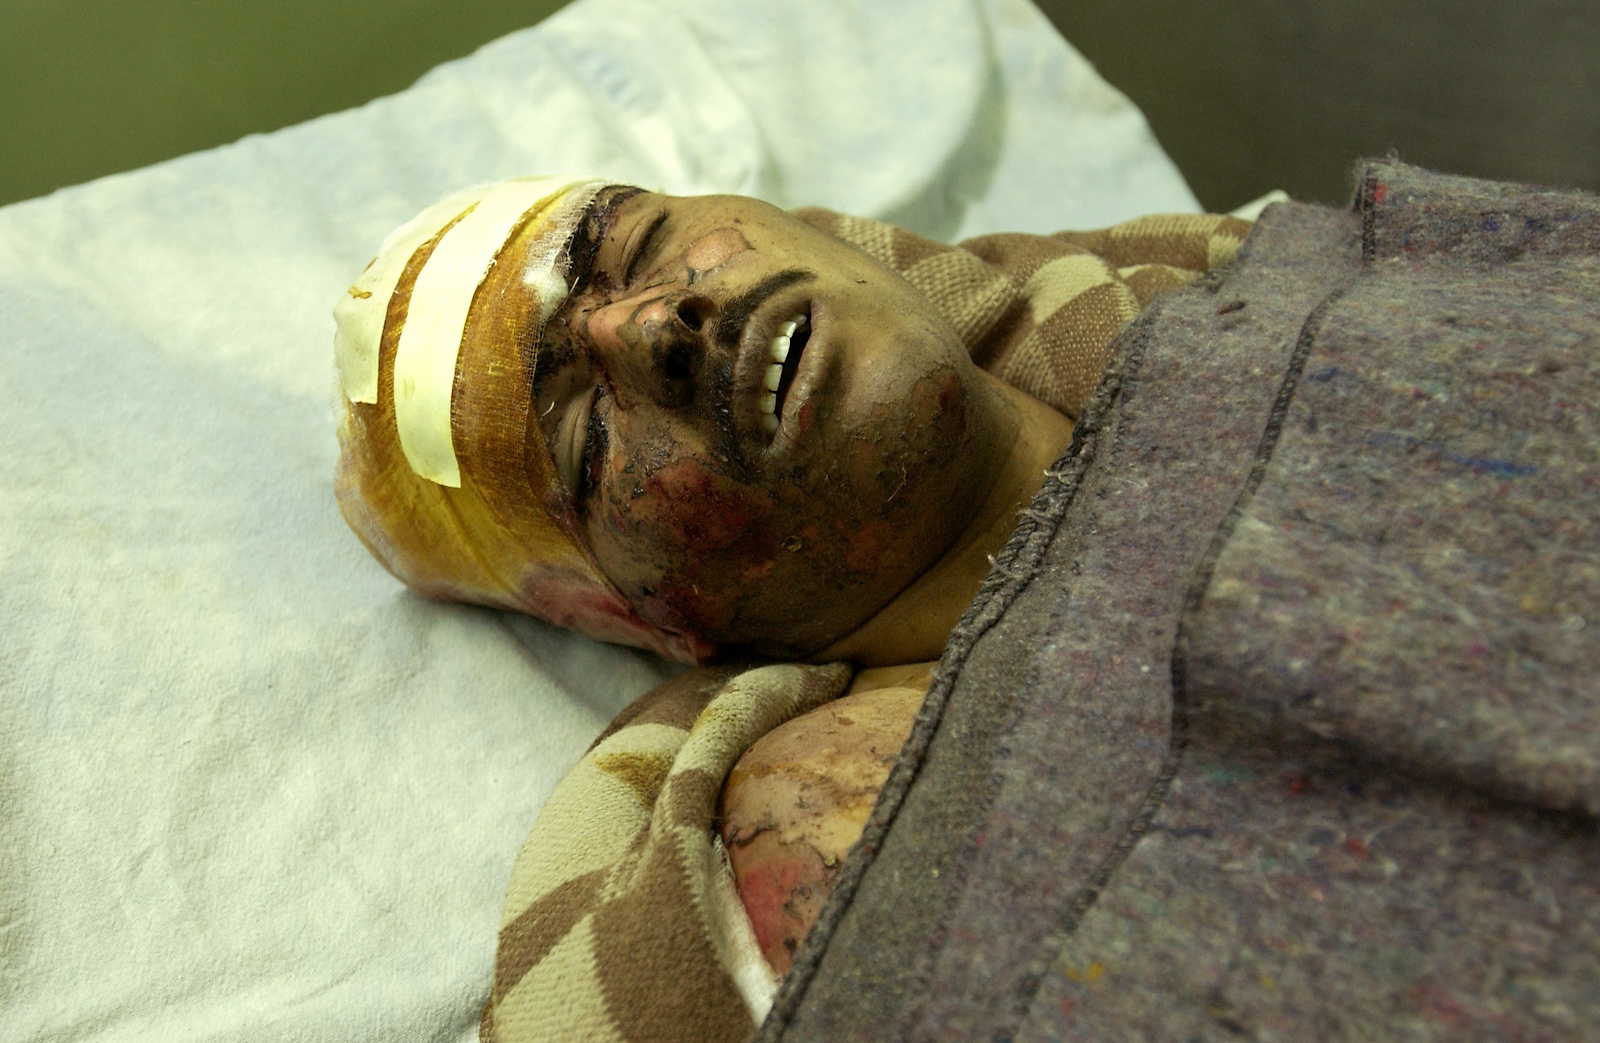 A wounded Iraqi man in Baghdad hospital after airstrikes in the days following the U.S. bombing of Baghdad, April 4, 2003.